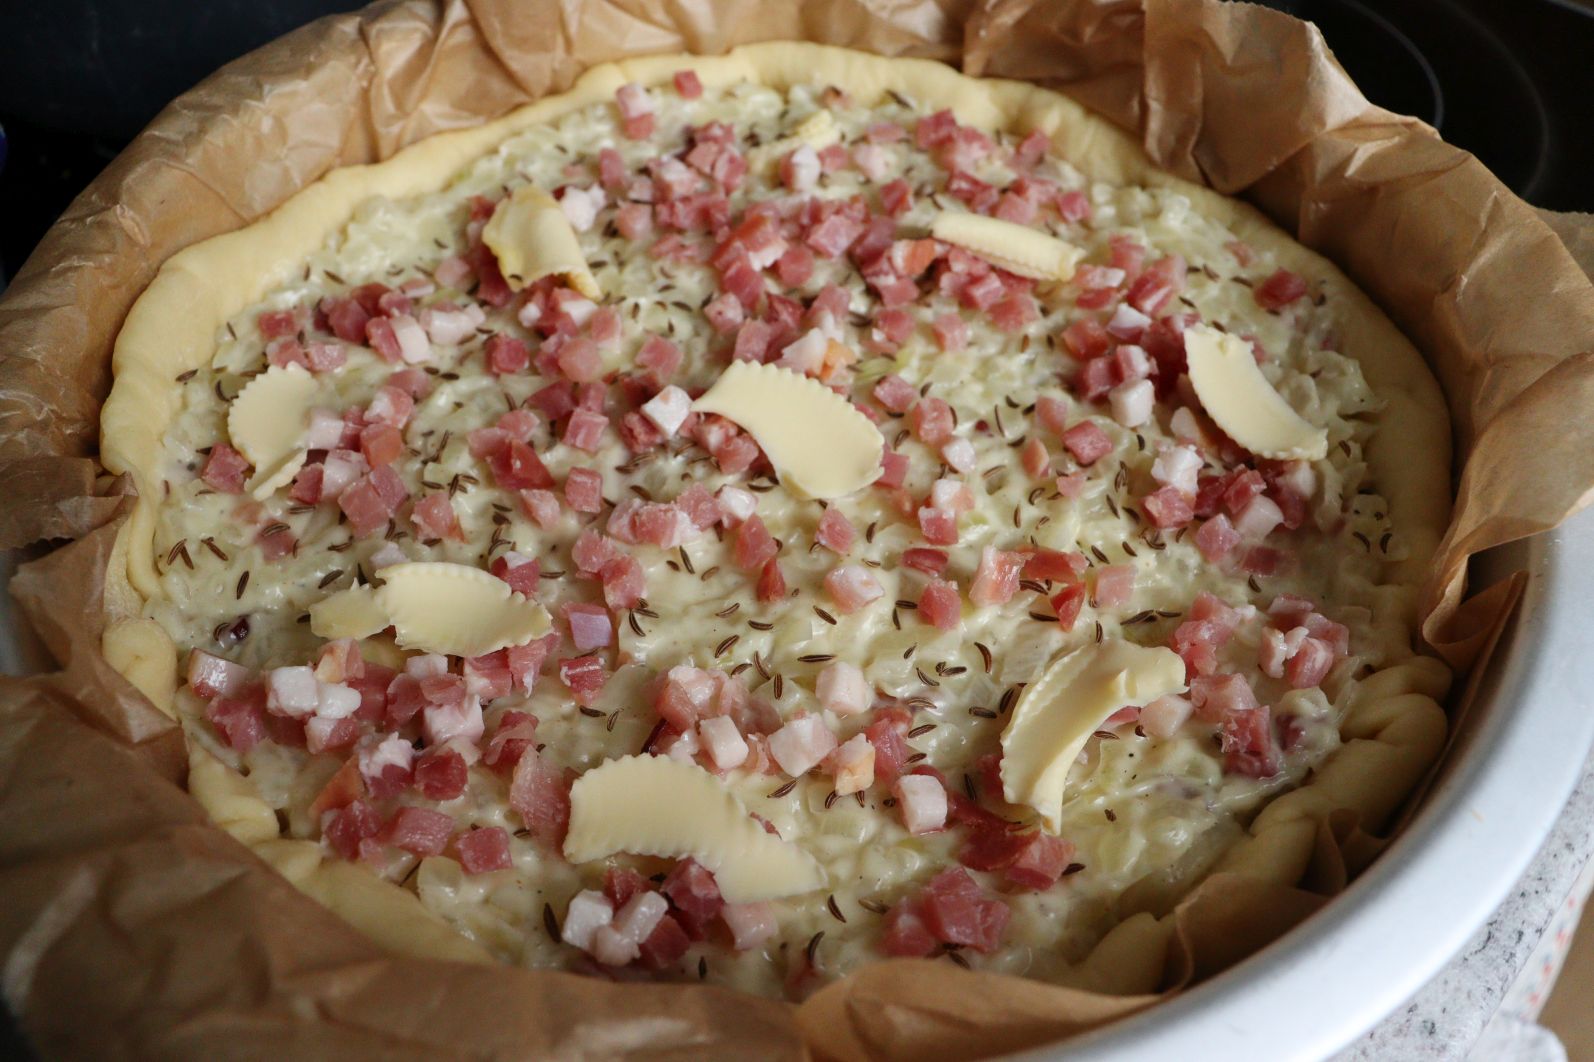 Raw Zwiebelkuchen - Onion Pie with onion and bacon filling, caraway seeds, bacon pieces and butter flakes on top